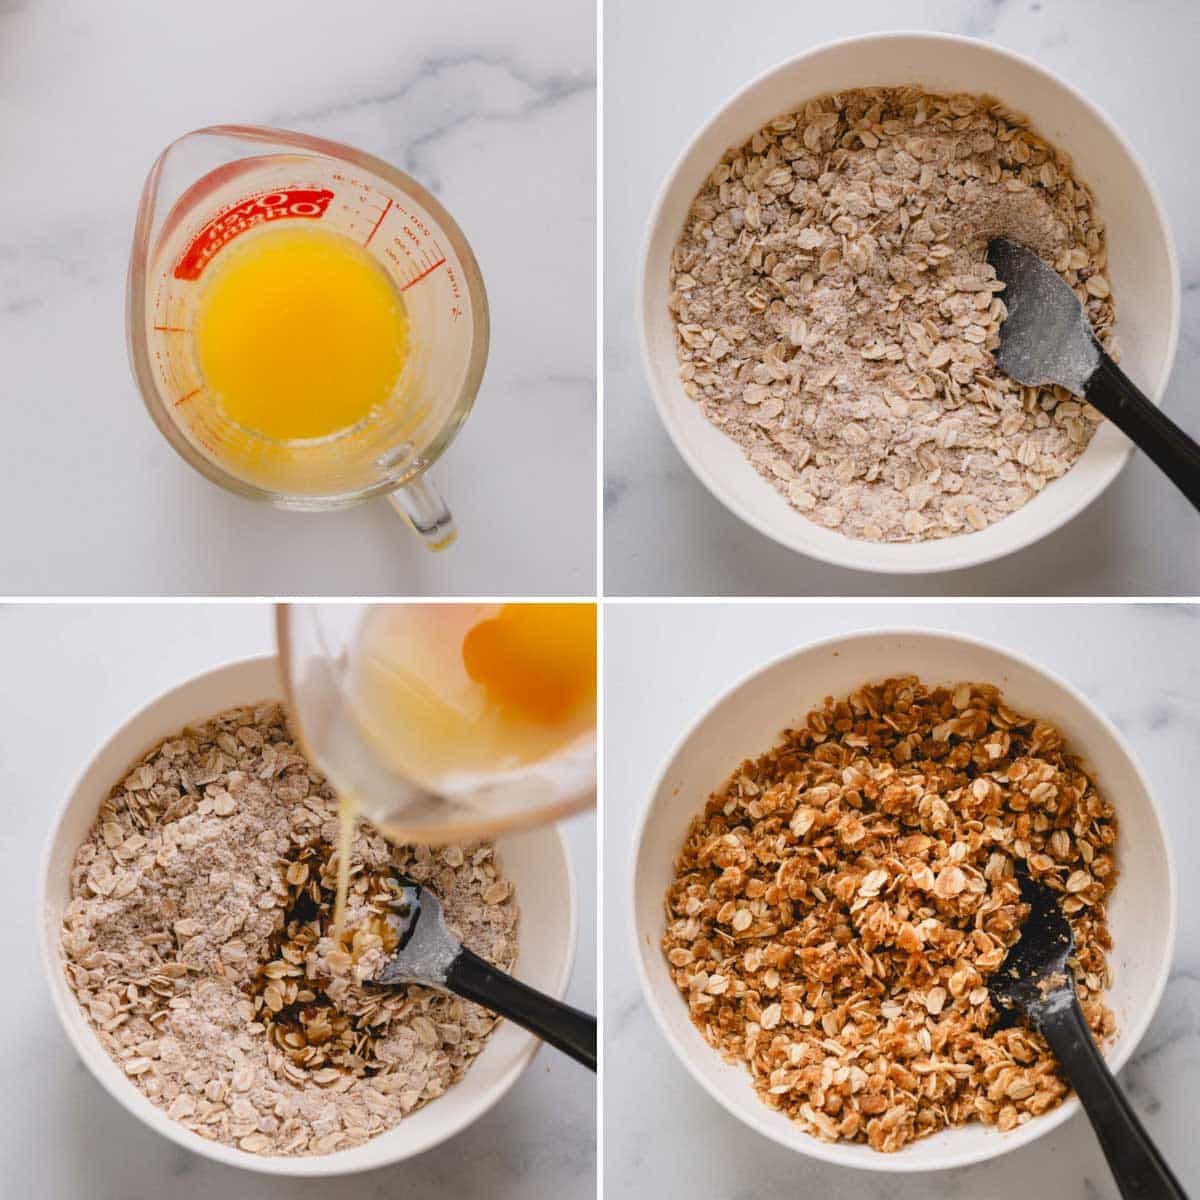 Four images showing the process of preparing a fruit crisp topping, mixing oats with butter.